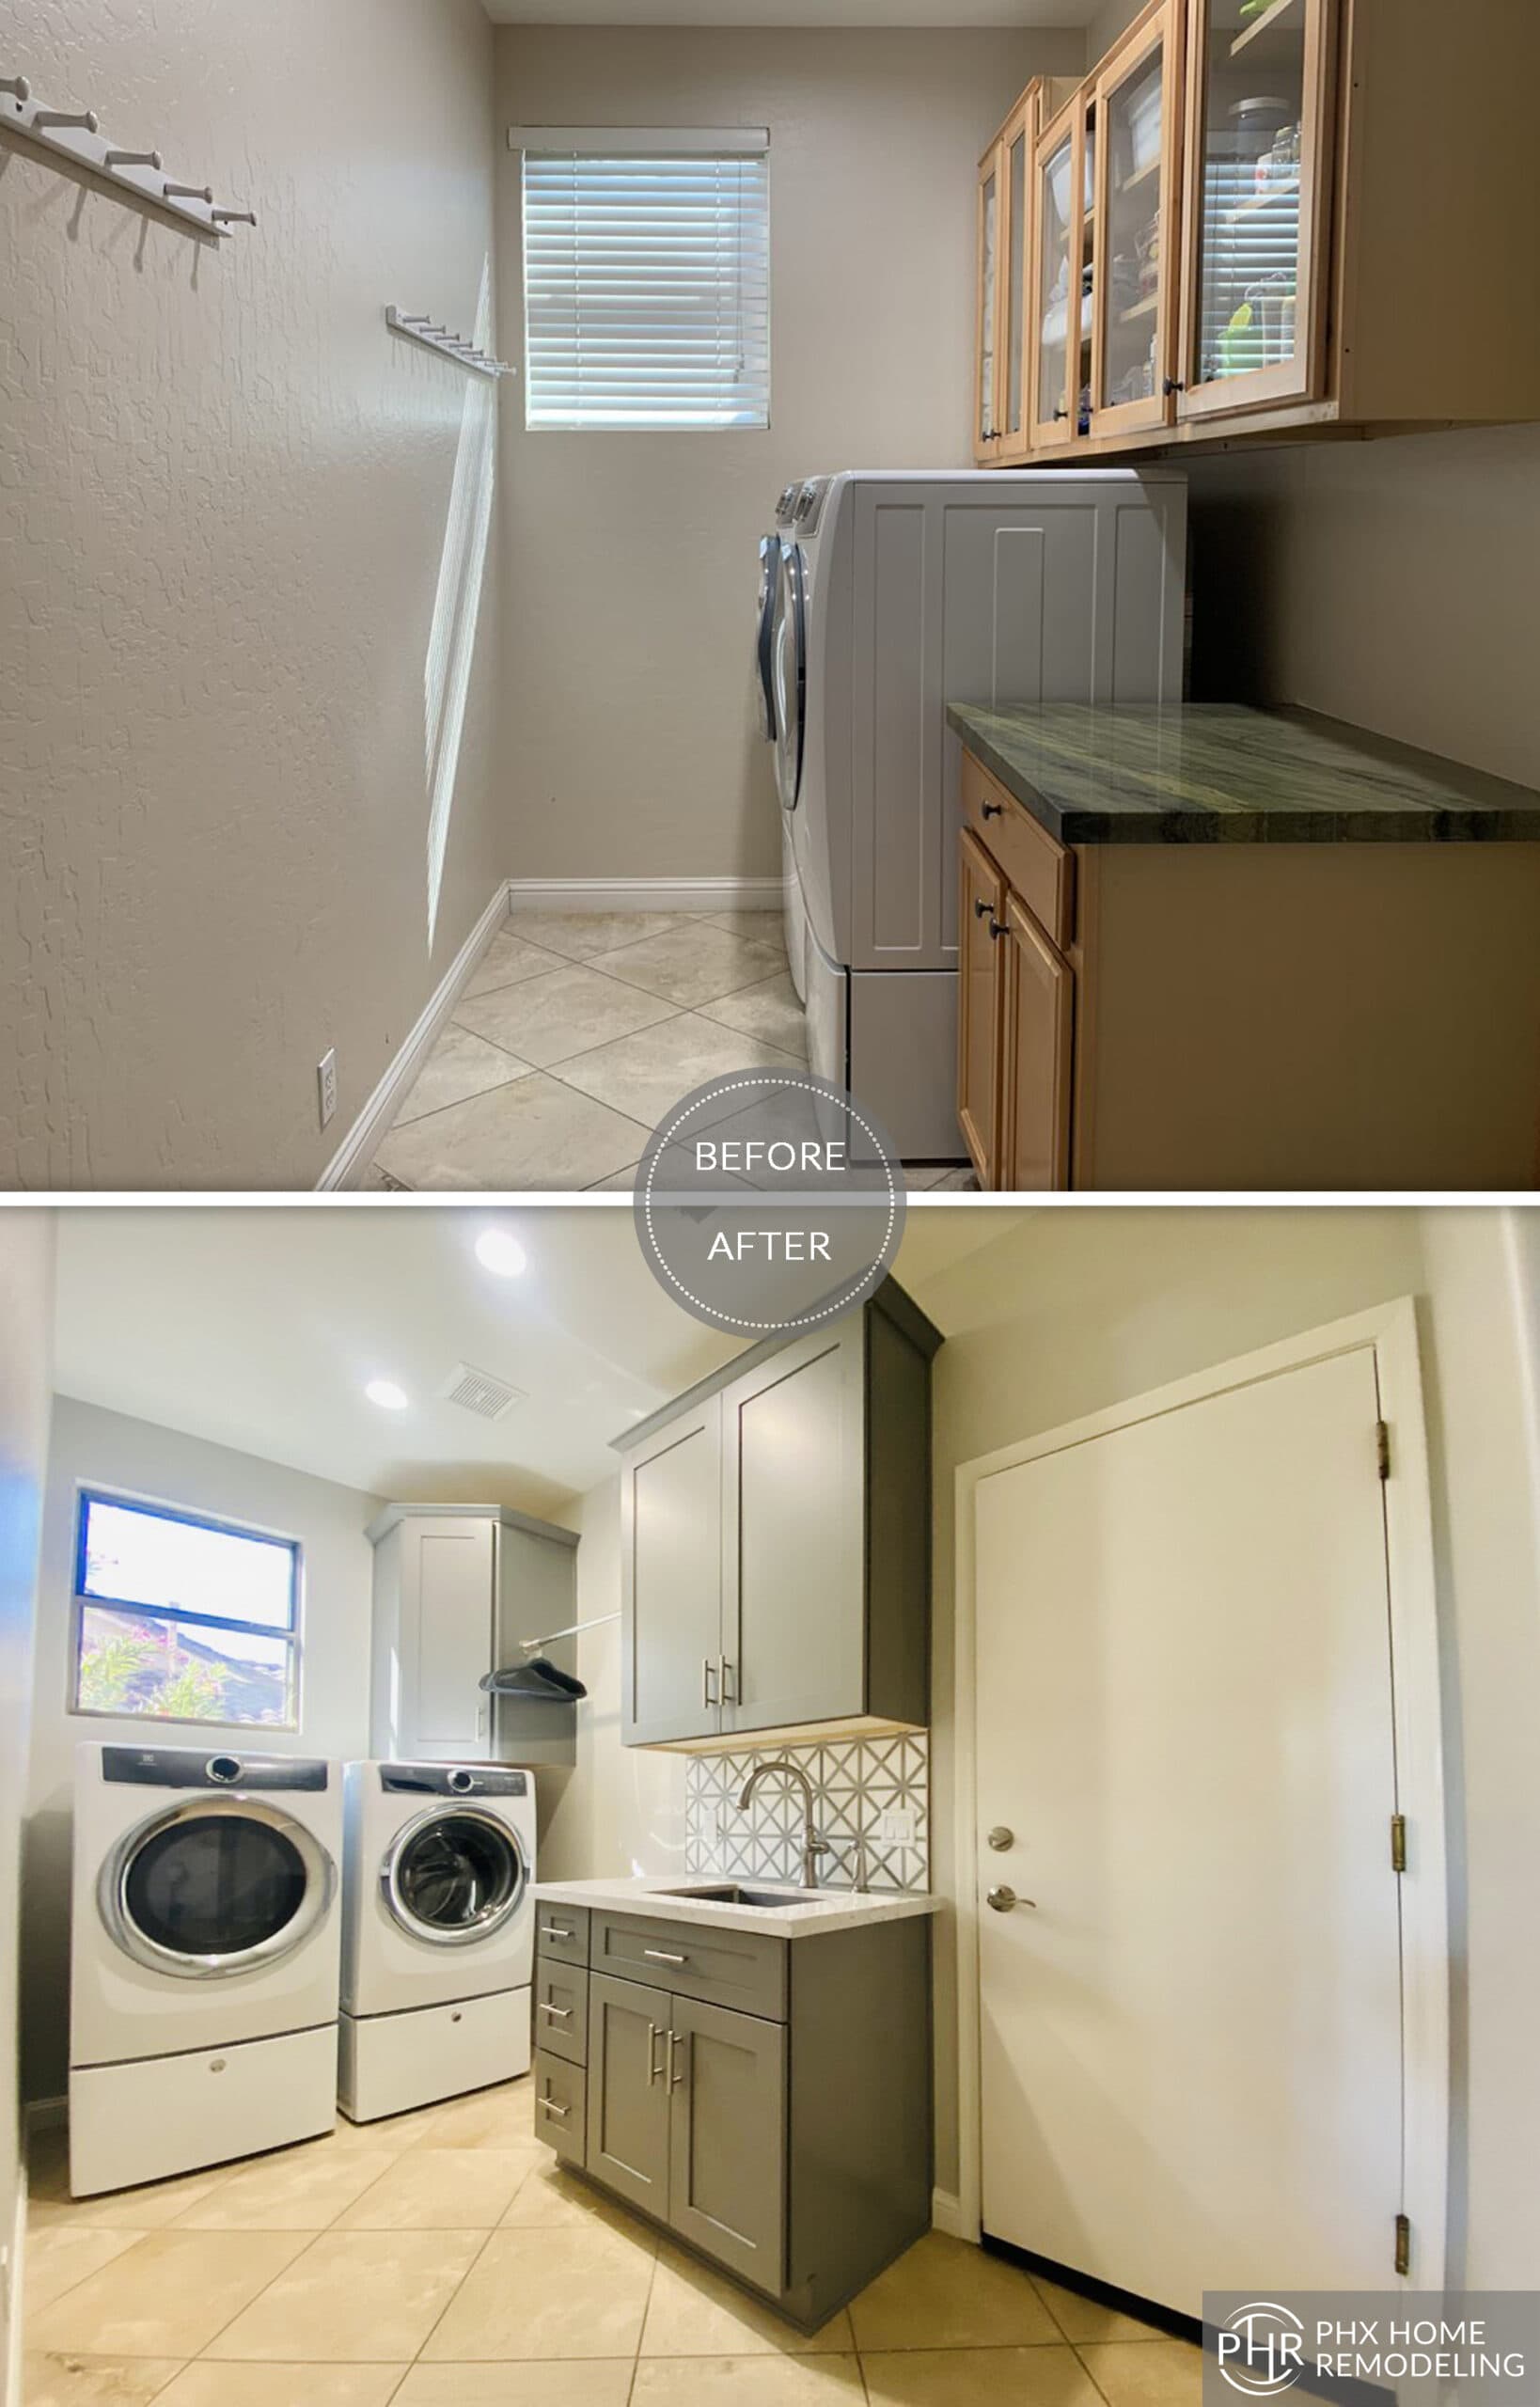 Interior Space Remodels Before And After Pictures - General Contractor Services